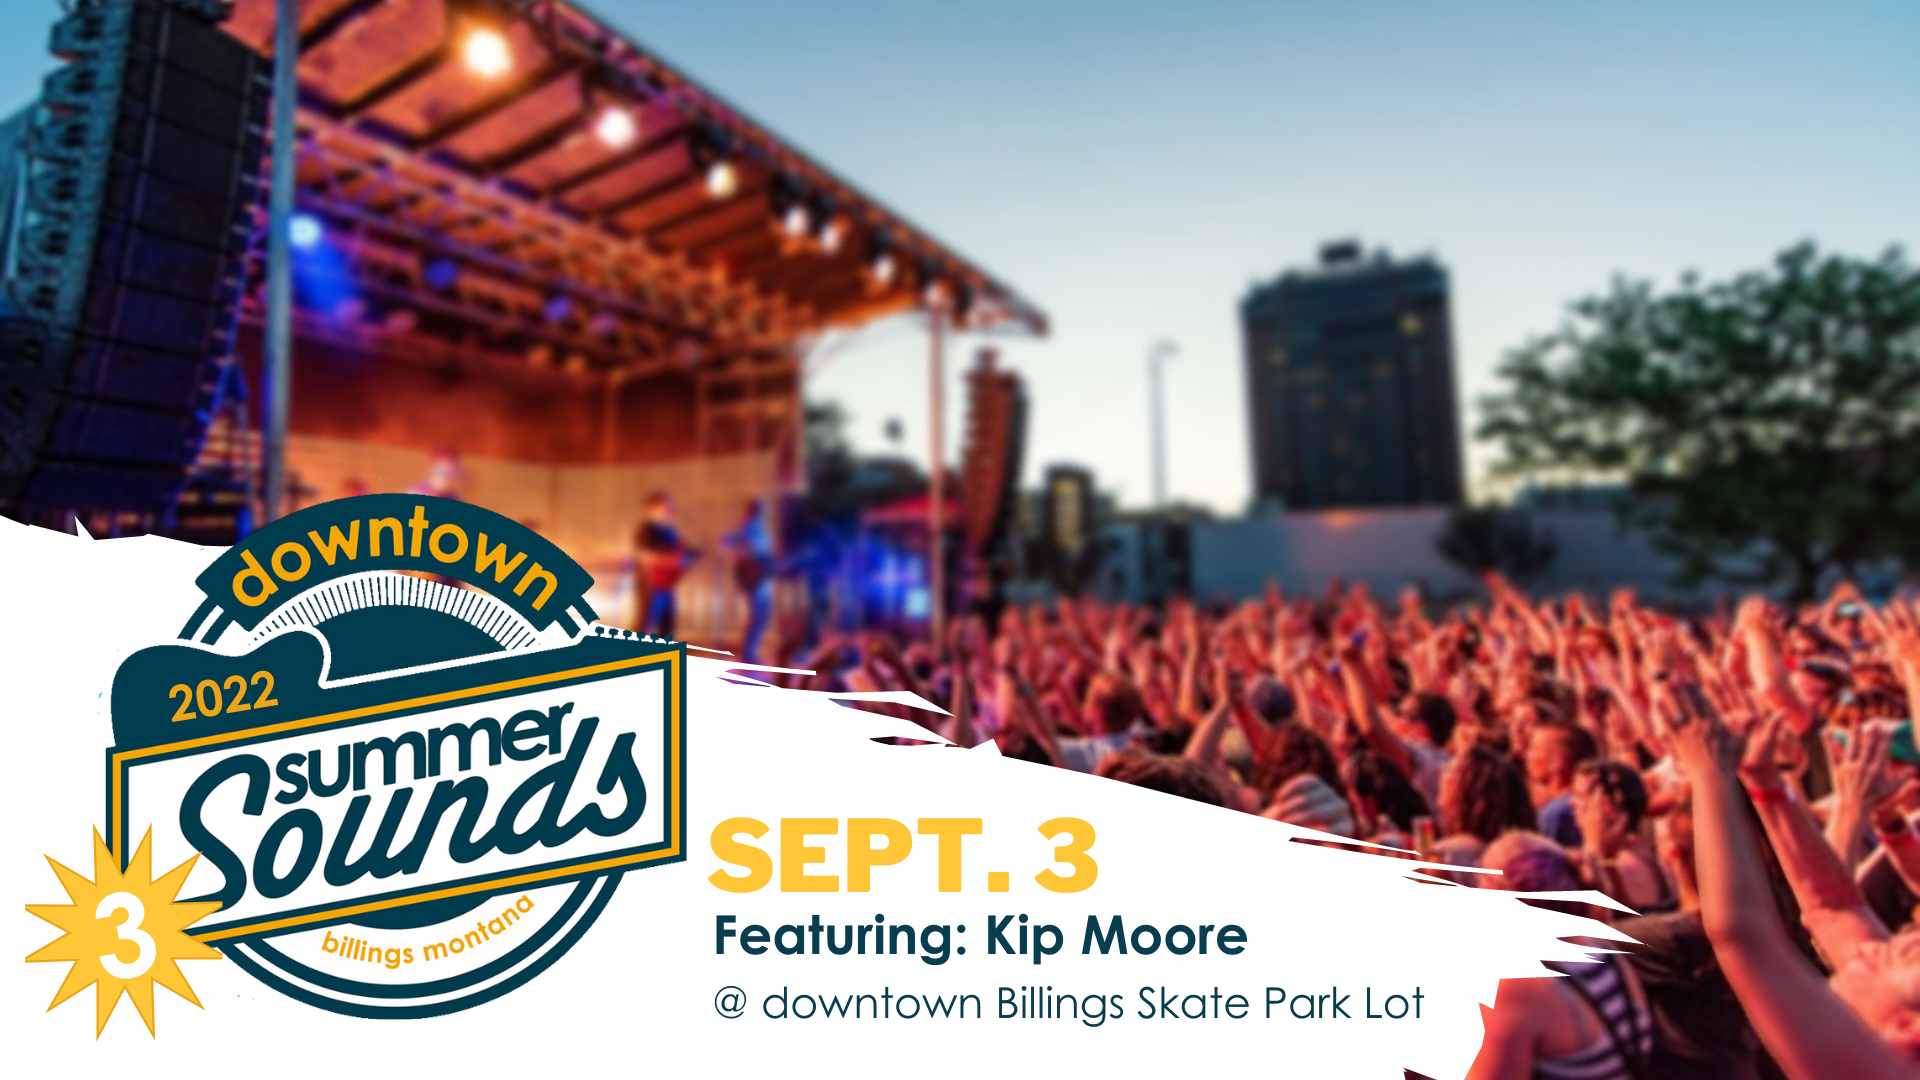 Downtown Summer Sounds 3 event feat. Kip Moore added to end the Summer